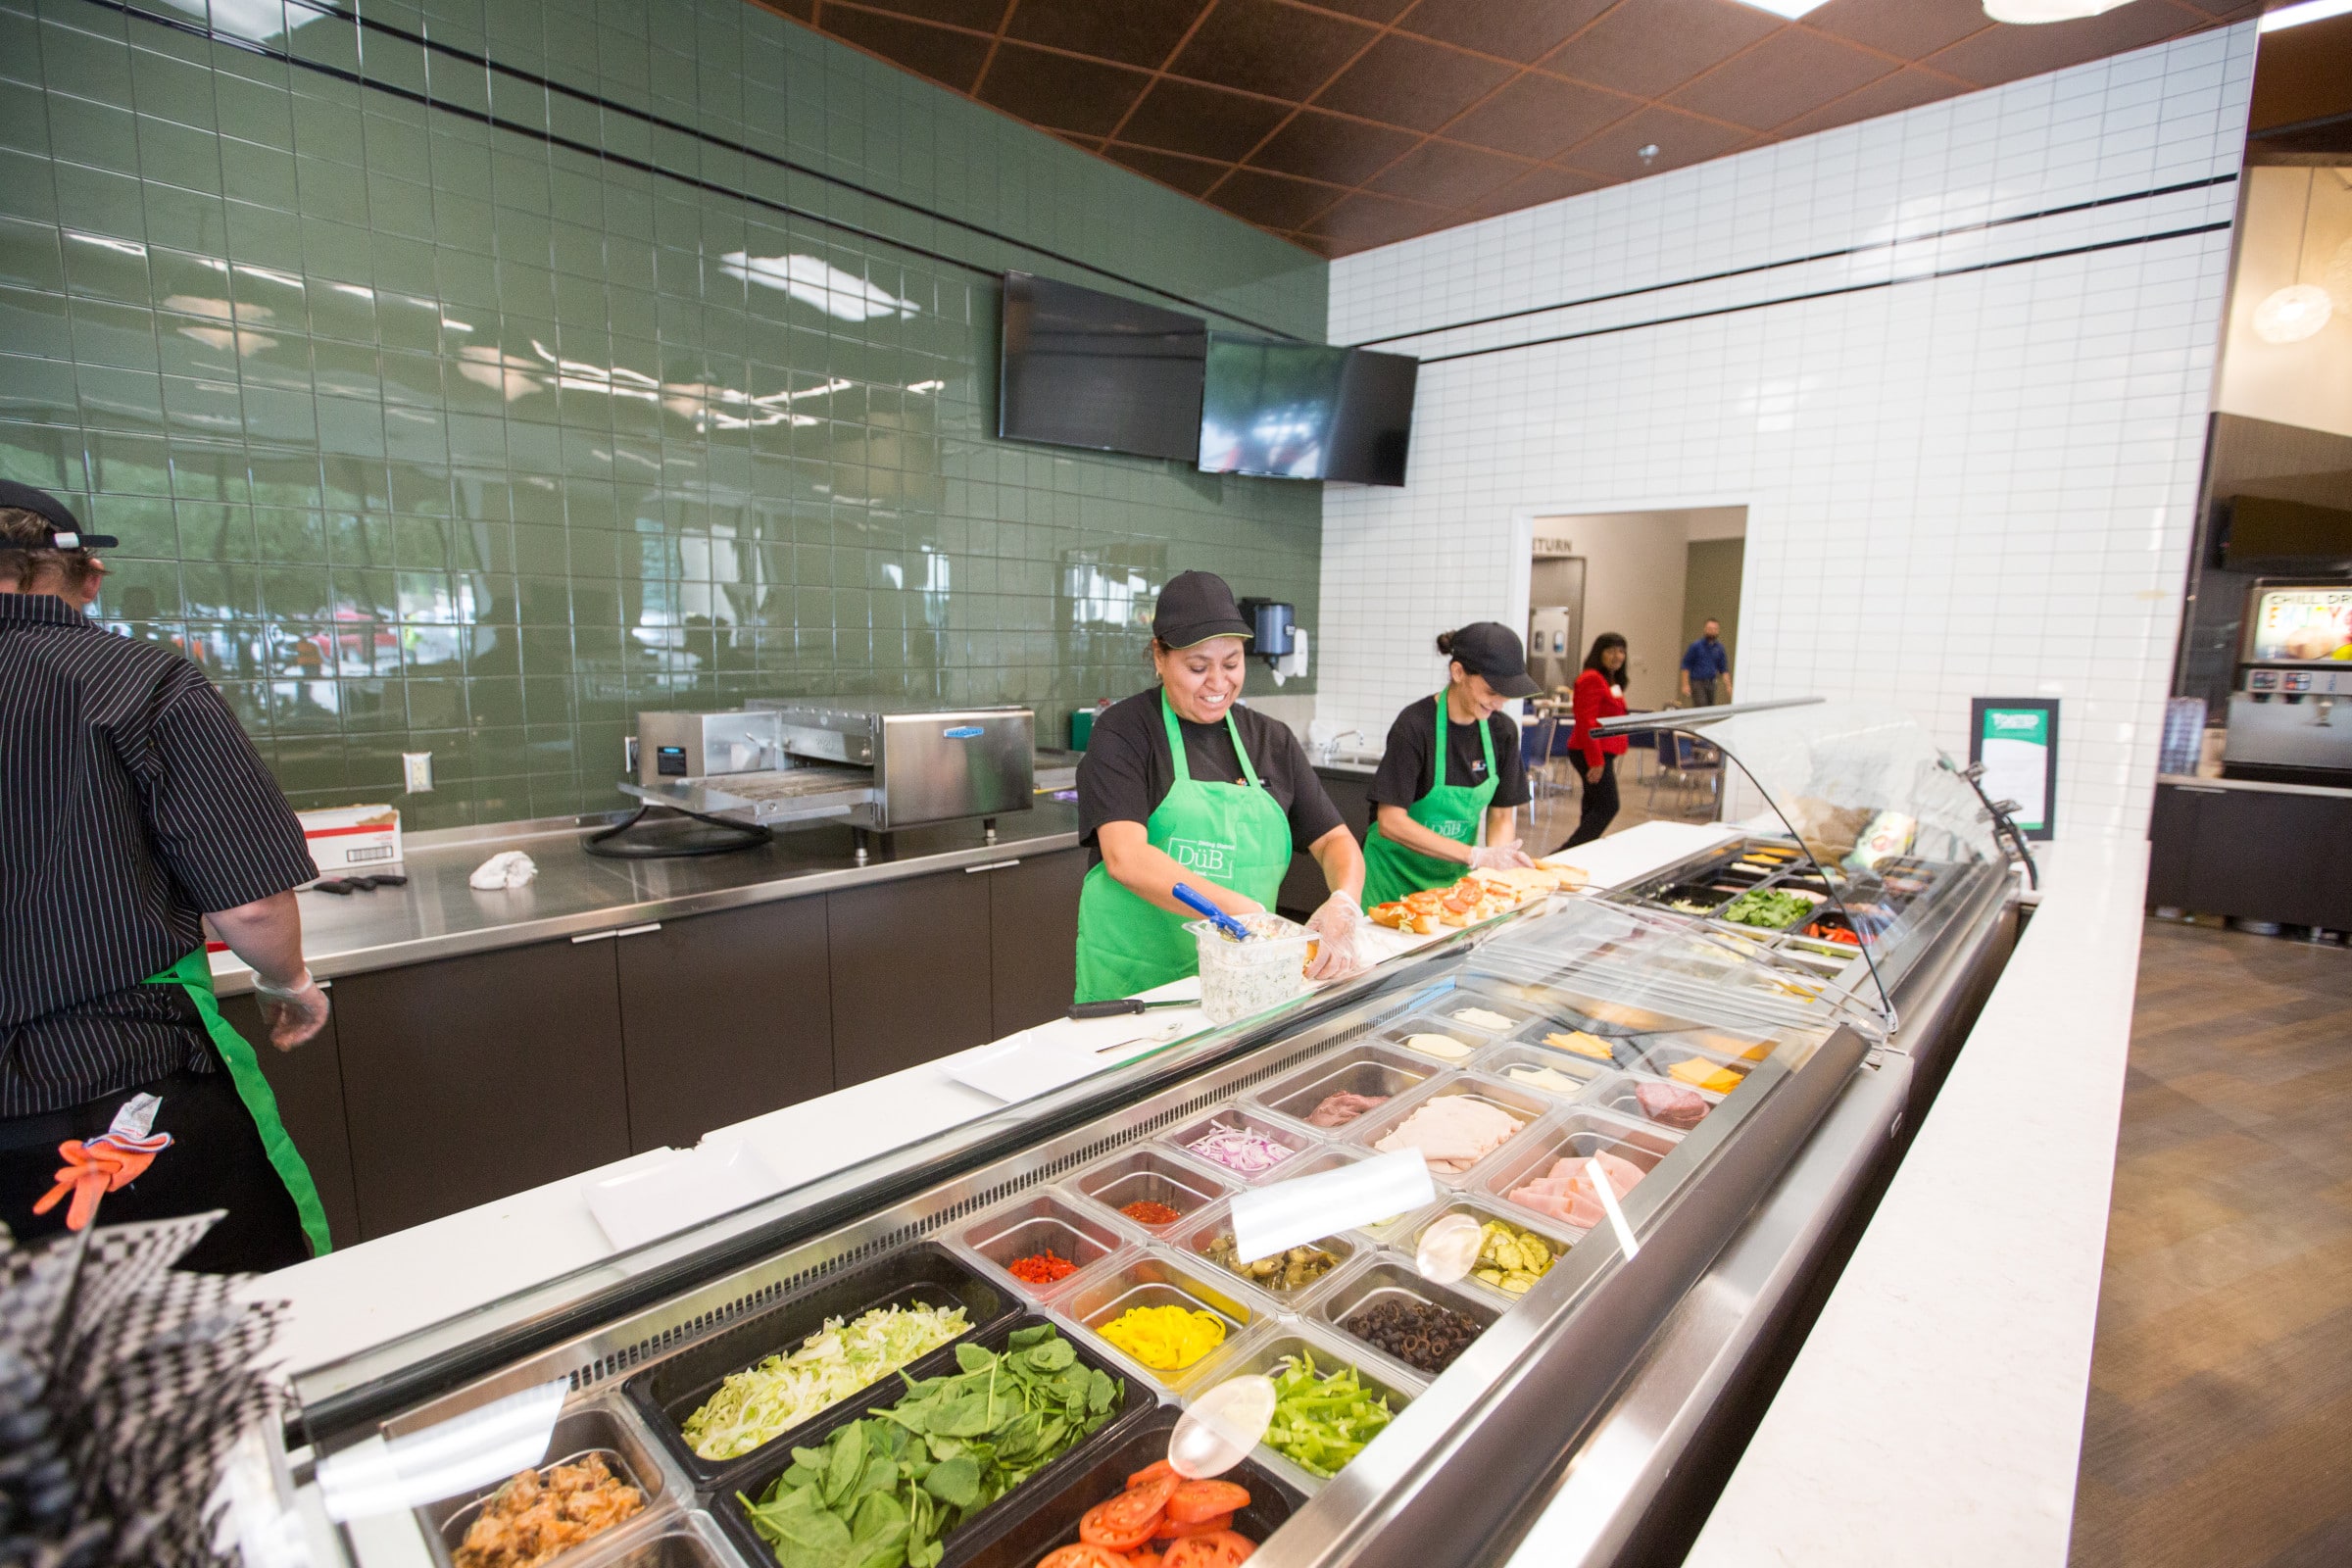 Employees prepare food in buffet dining hall.